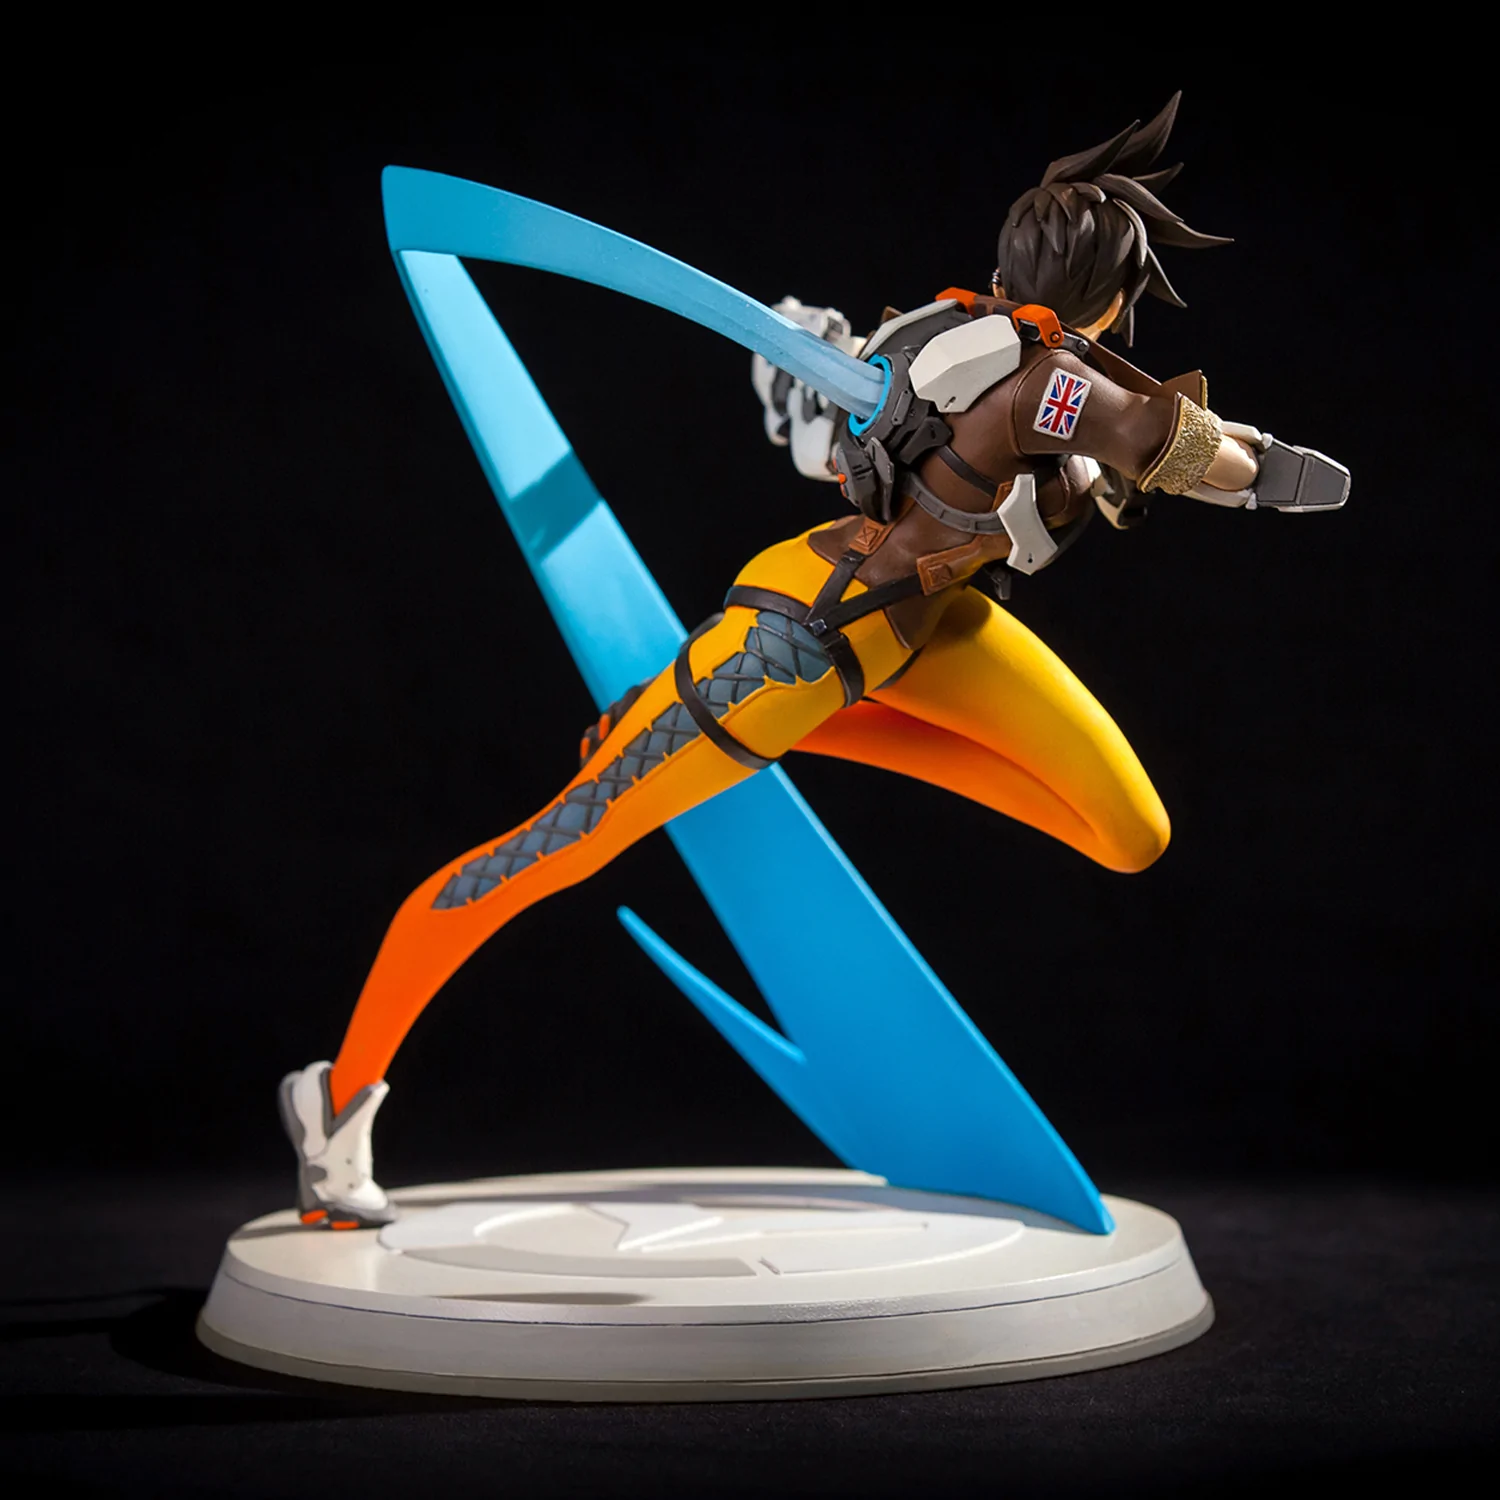 Tracer (Overwatch / Game) – Time to collect